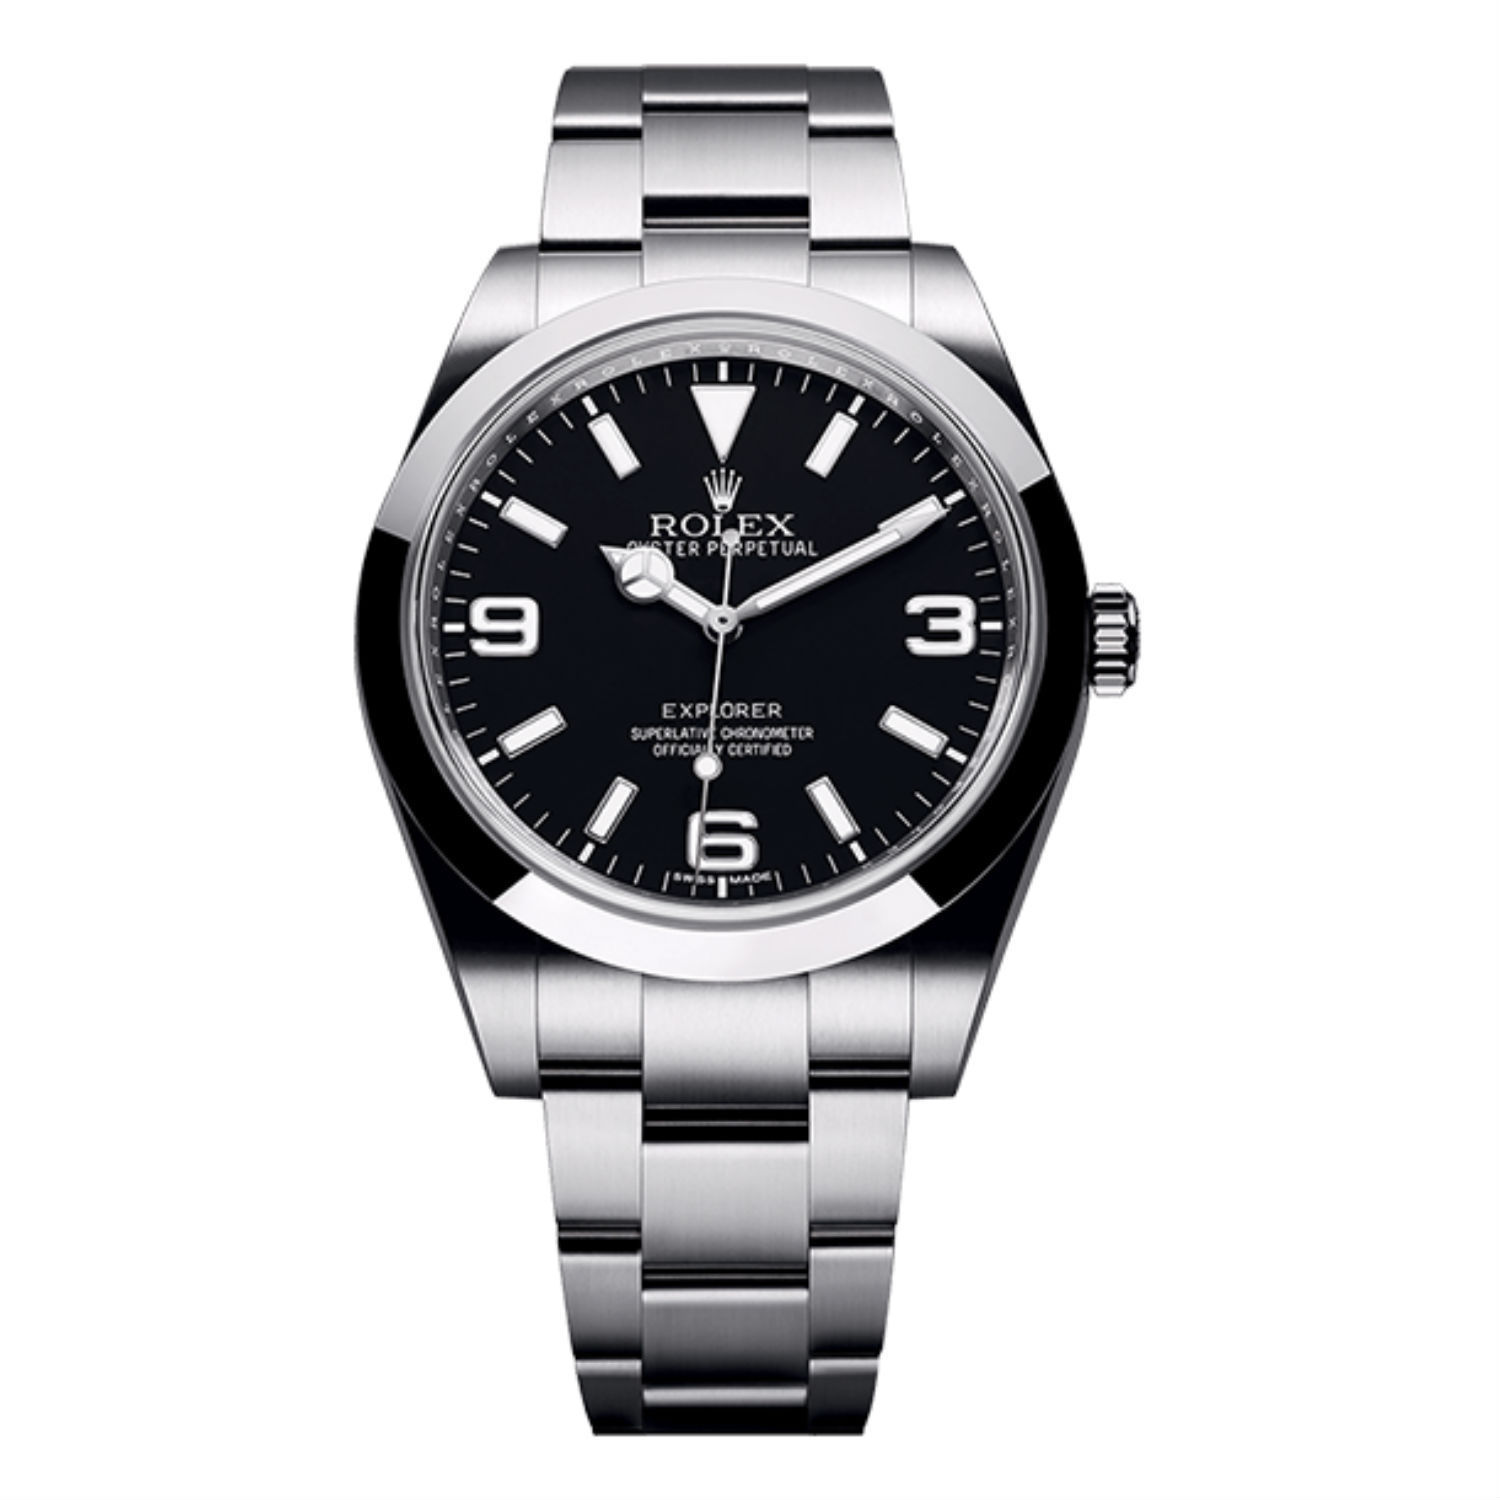 Rolex Explorer 214270 - 39mm in Stainless Steel - US